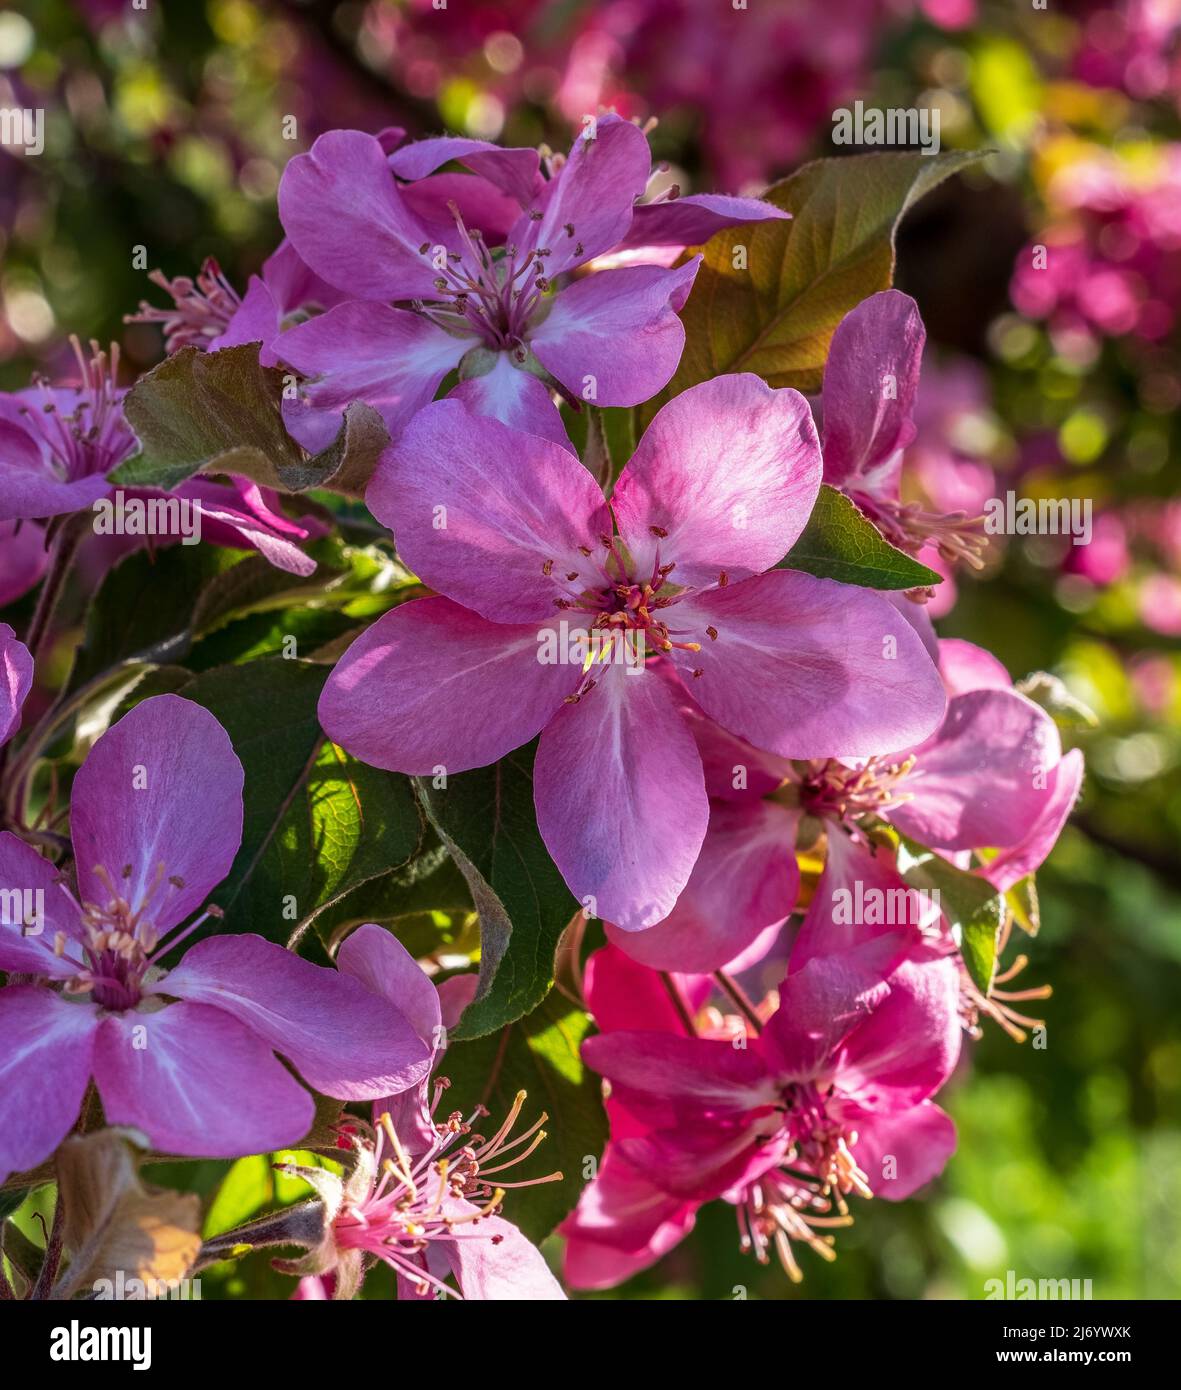 Pink flowers of blooming Apple tree in spring on a sunny day in nature outdoors Stock Photo